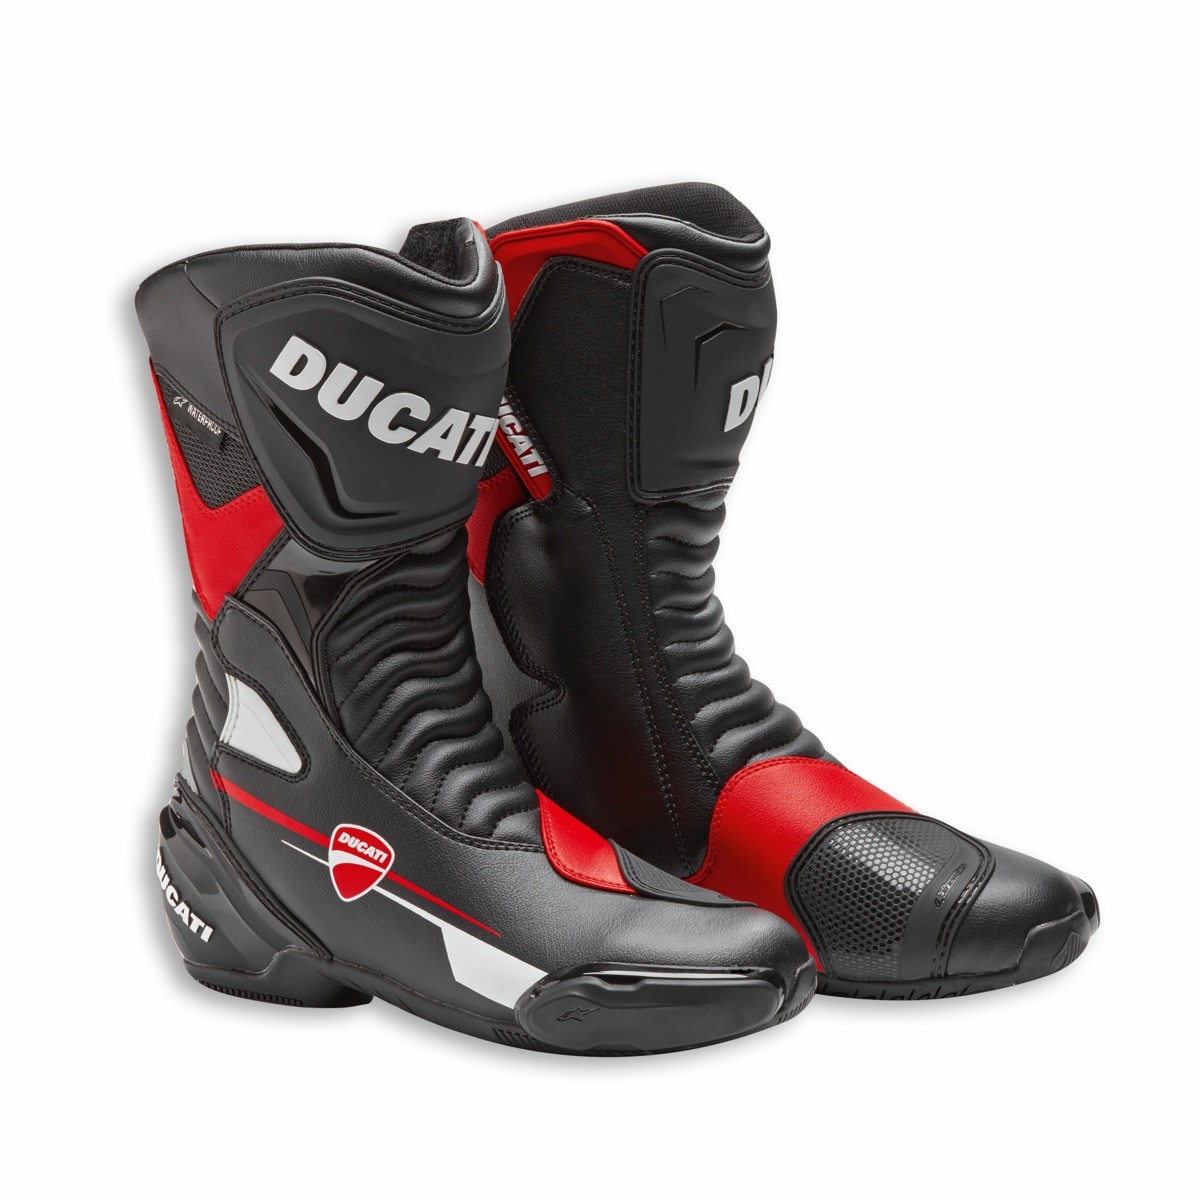 Speed Evo C1 WP - Sport-touring boots